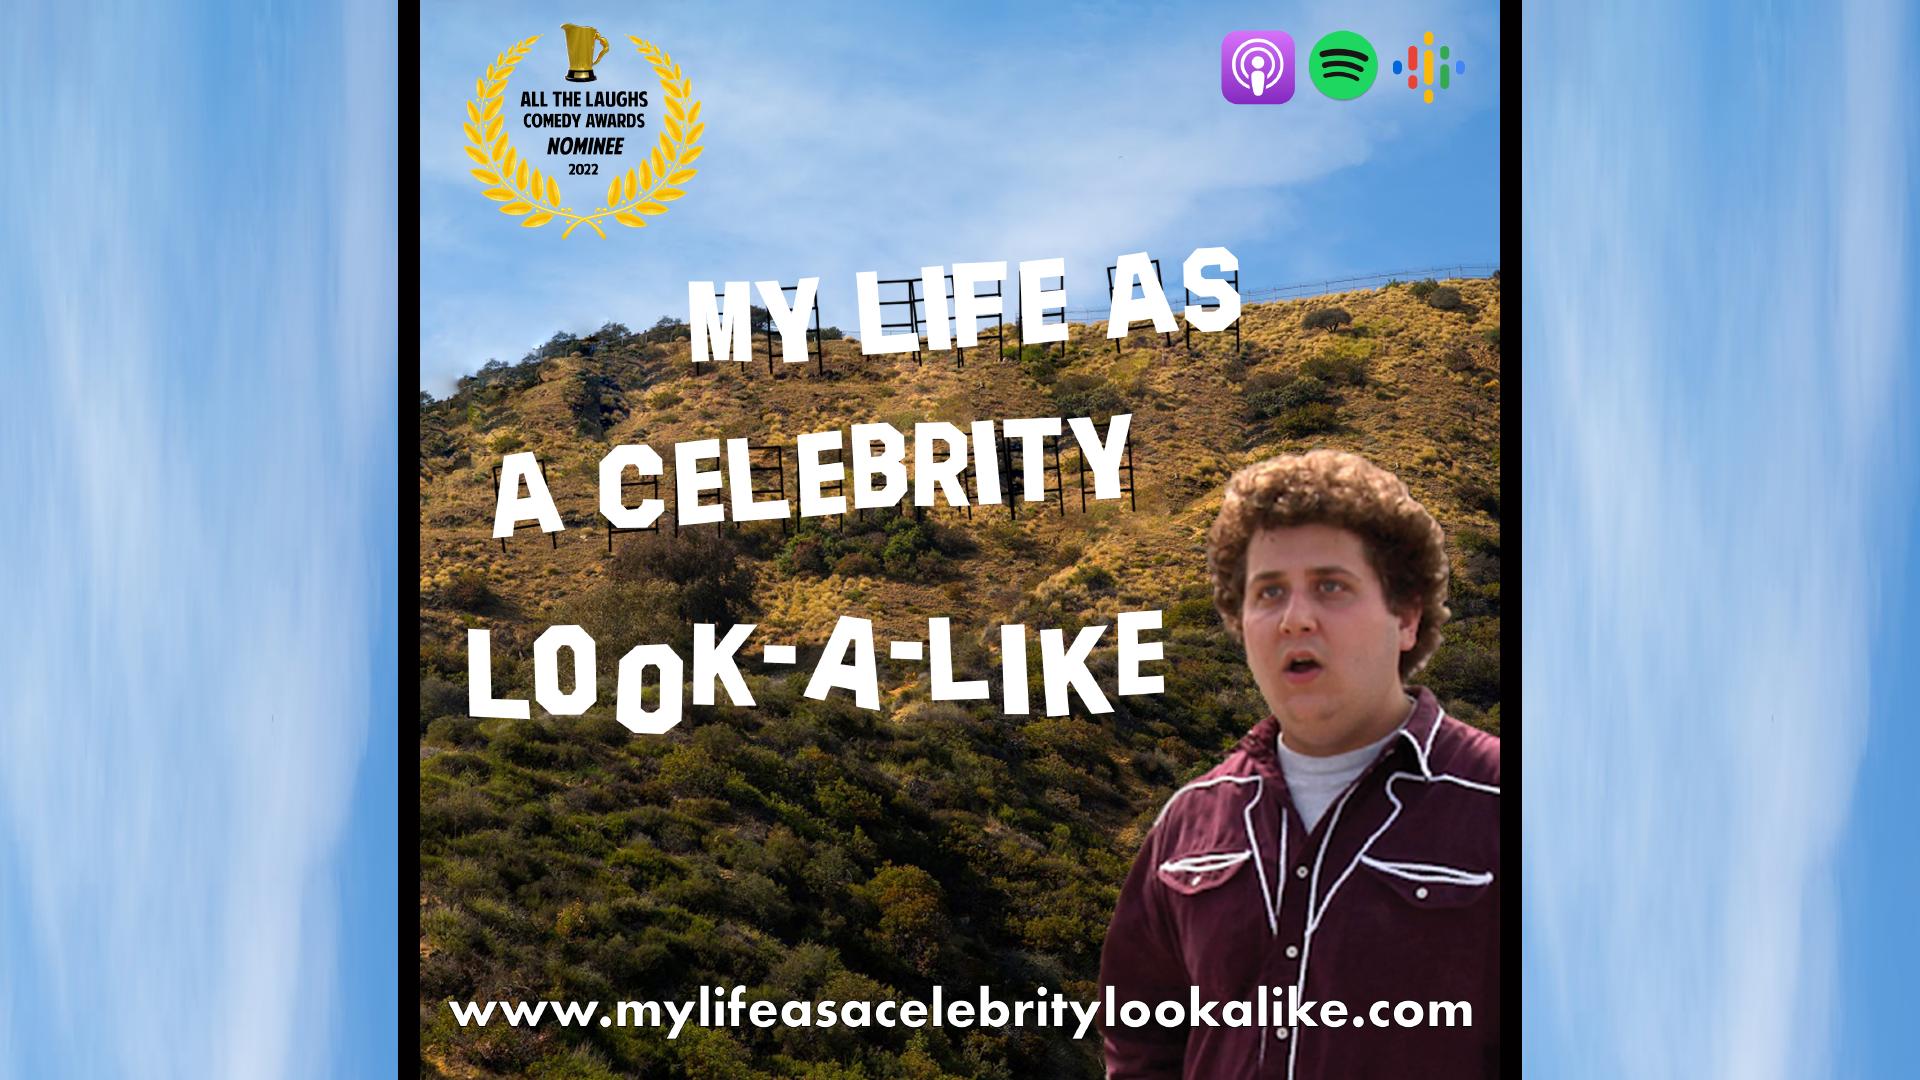 My Life as a Celebrity Look-A-Like